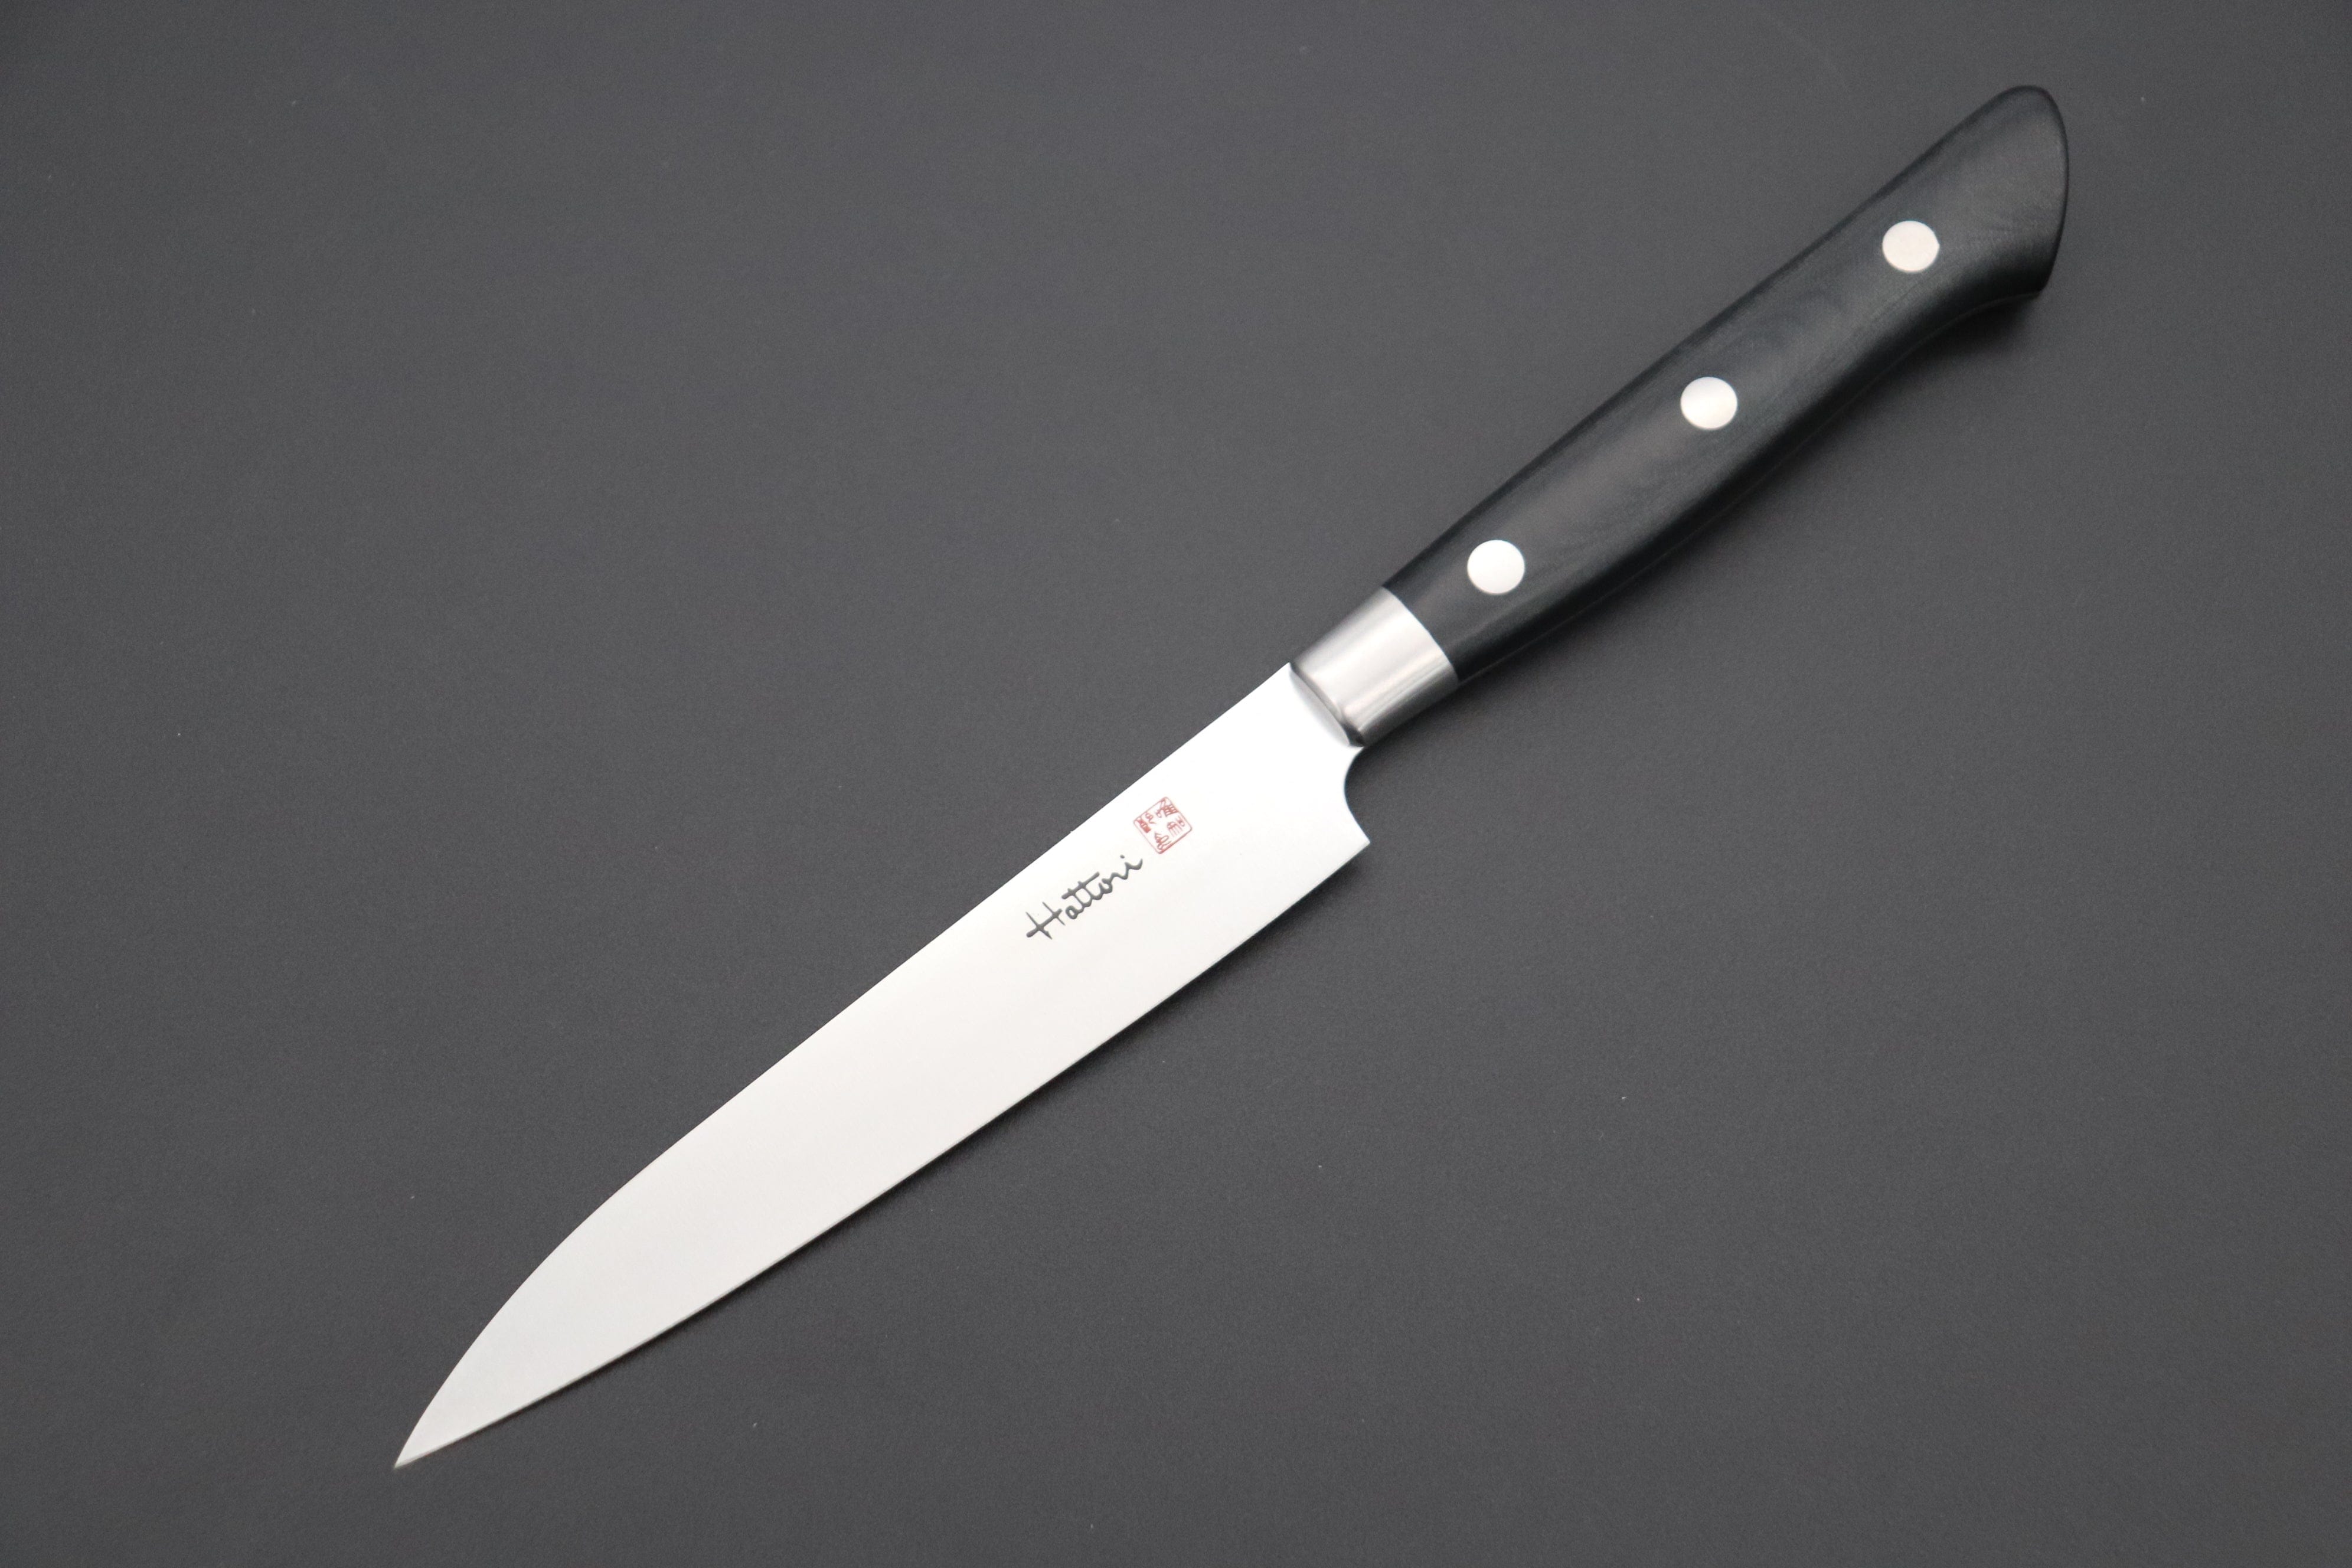 Hattori Forums FH Series Petty (120mm and 150mm, Black Linen Micarta Handle)